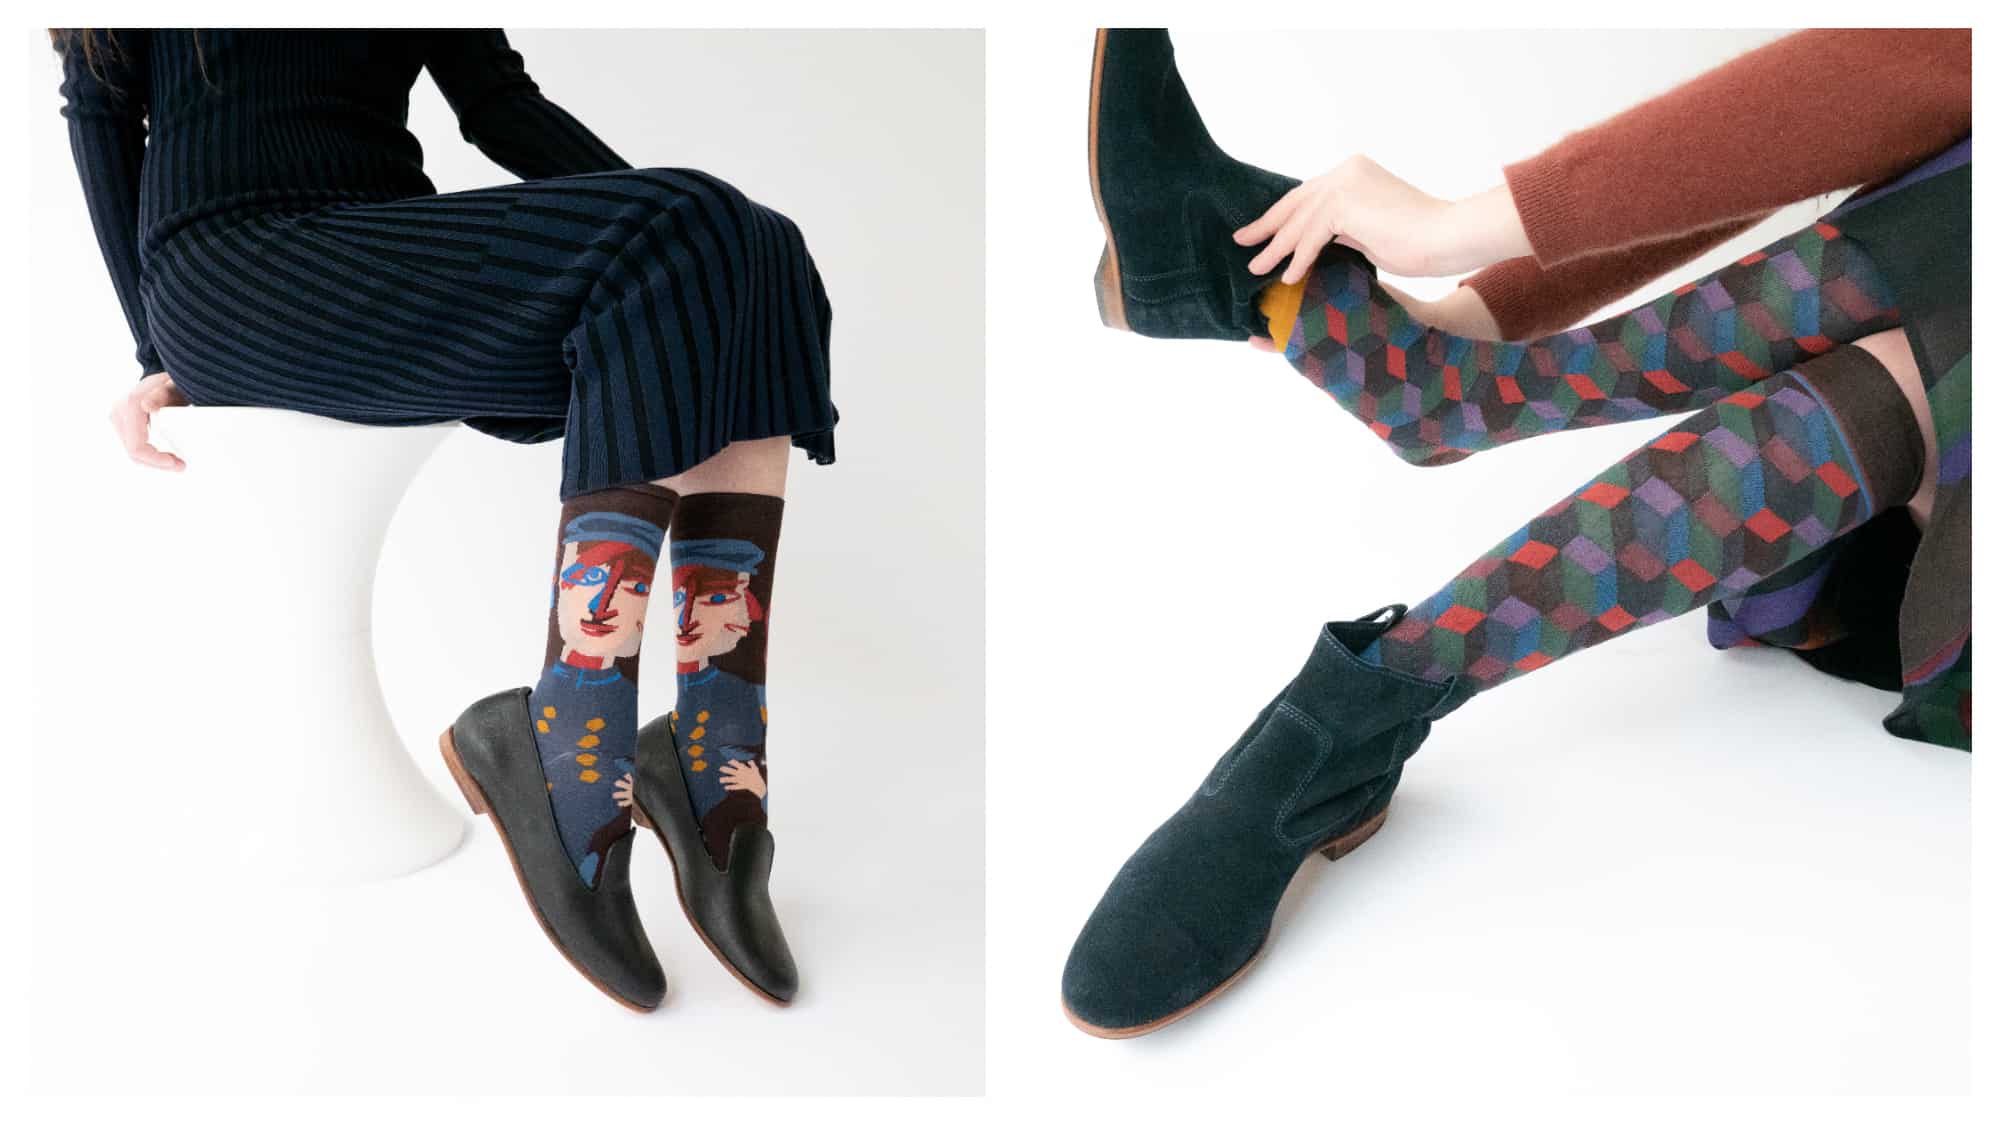 On the left and right are shots of women dressed in a mid length skirts and flat shoes, wearing eclectic socks from Bonne Maison.